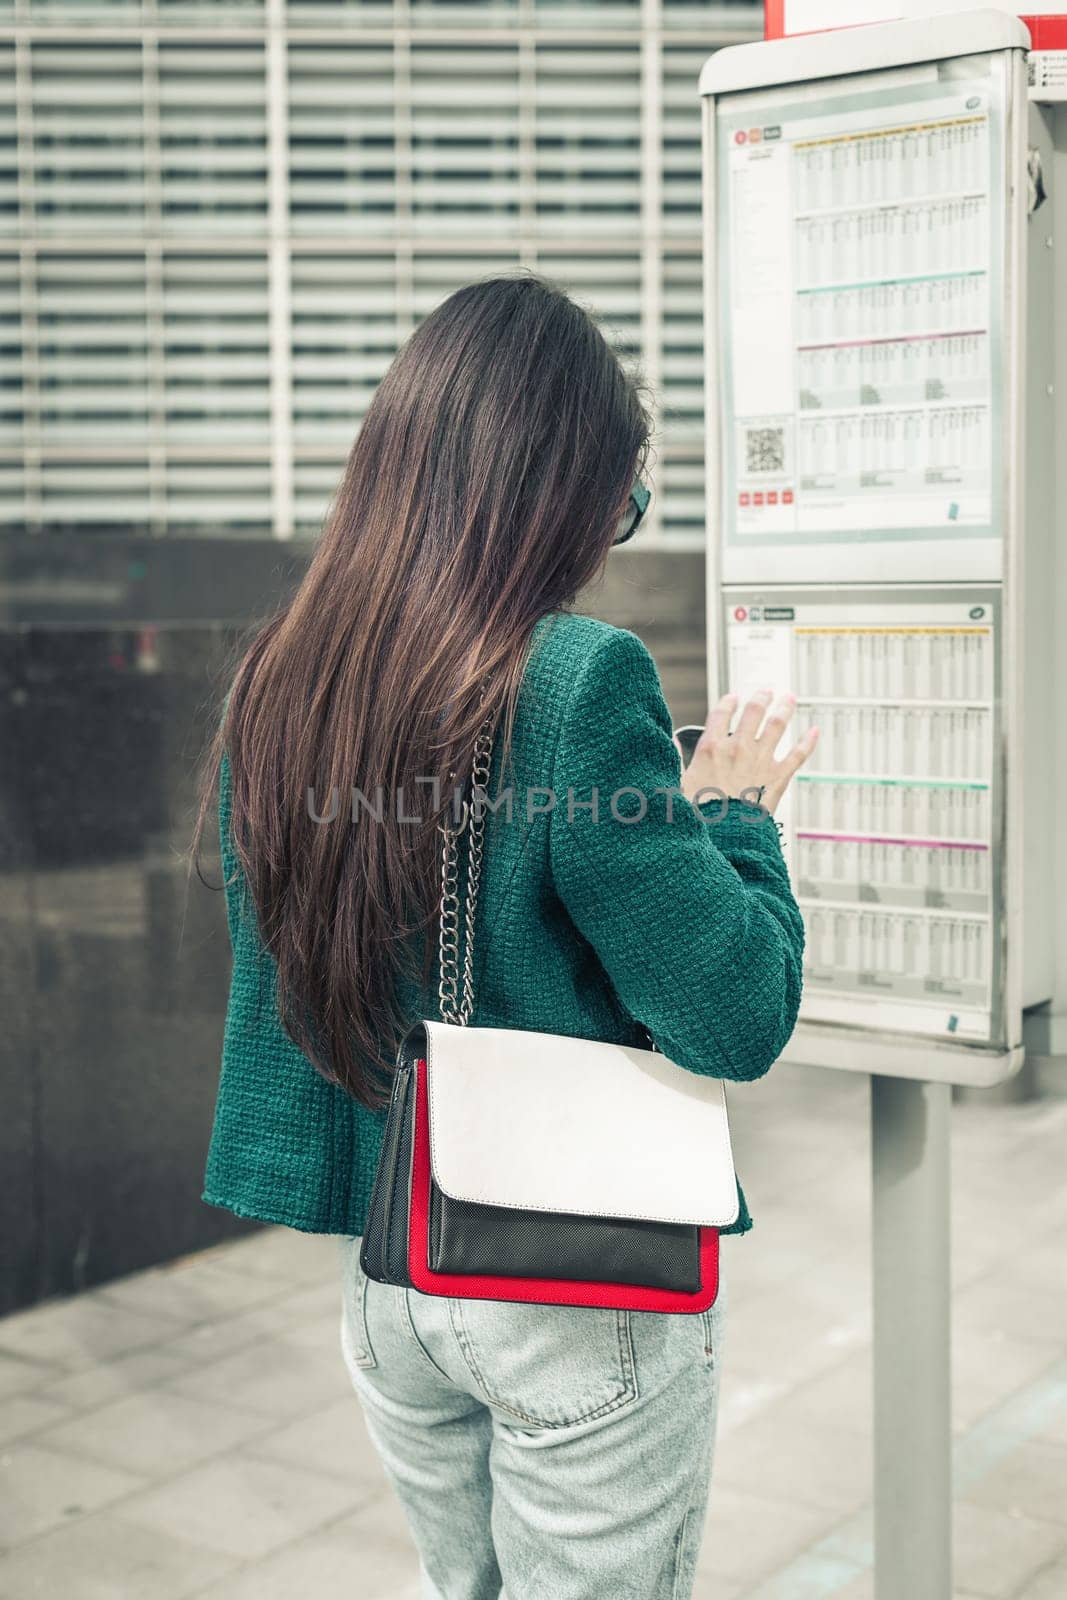 One young caucasian brunette girl with long flowing hair in a green jacket stands with her back at a bus stop near the schedule board, close-up side view.